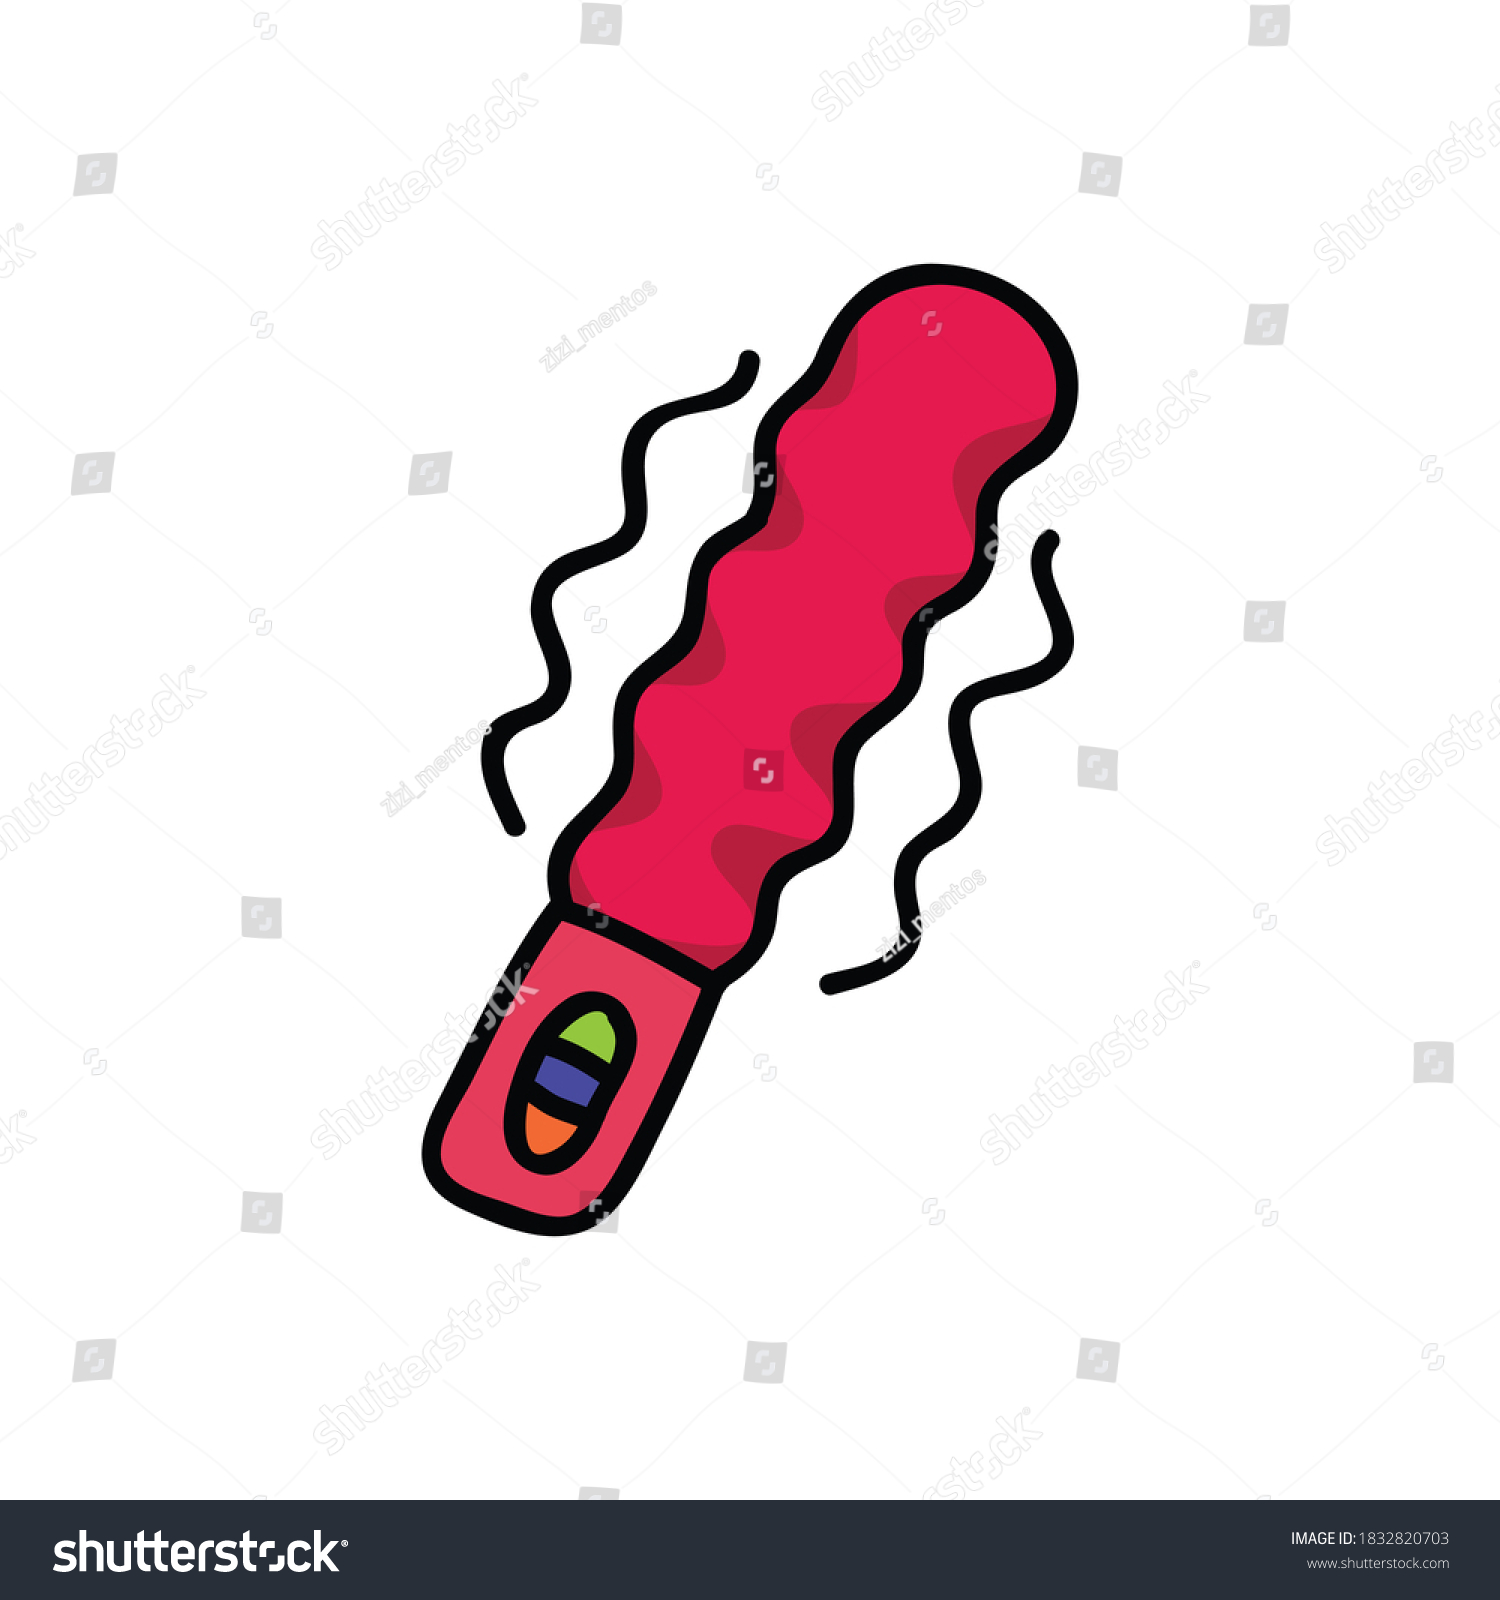 Vibrator Sex Toy Doodle Icon Vector Stock Vector Royalty Free 1832820703 Shutterstock 6570